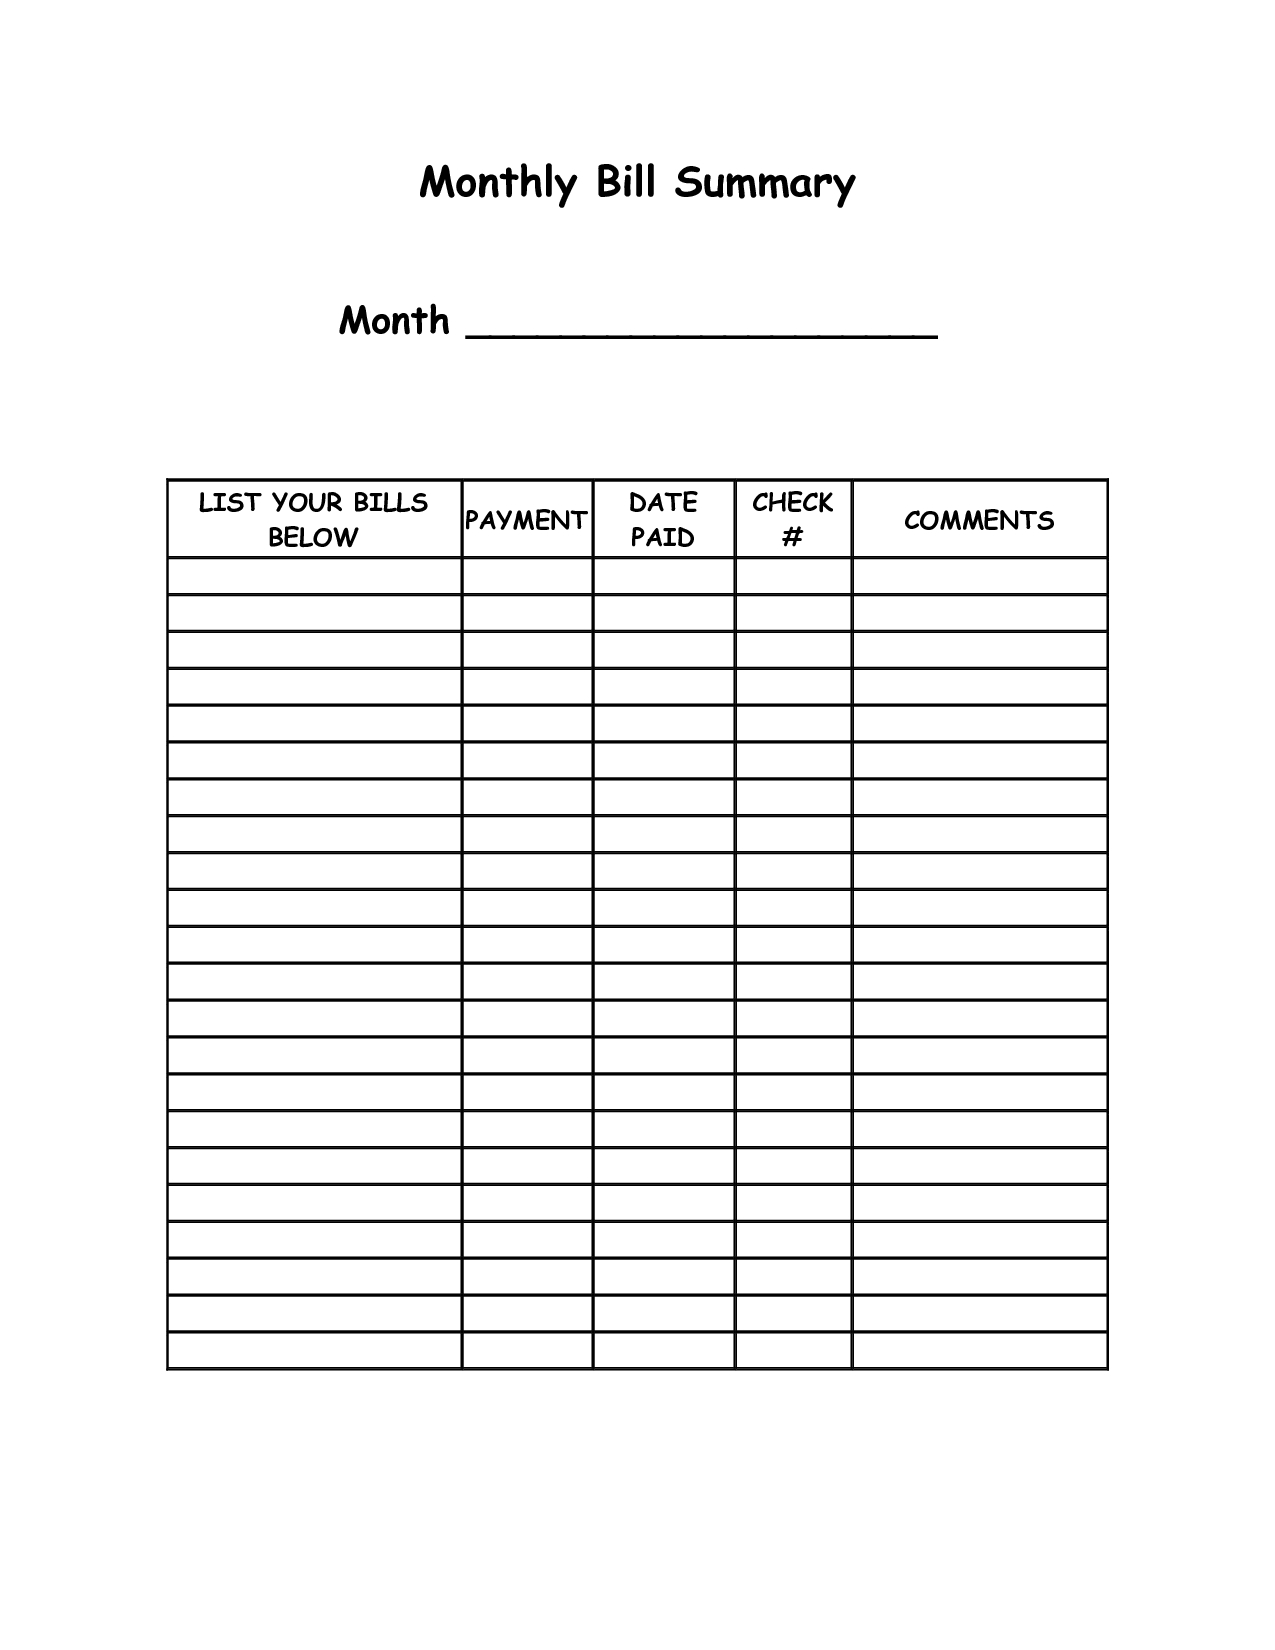 Monthly Bill Summary Doc | Organization | Bill Payment Organization throughout Printable Monthly Bill Organizer Template